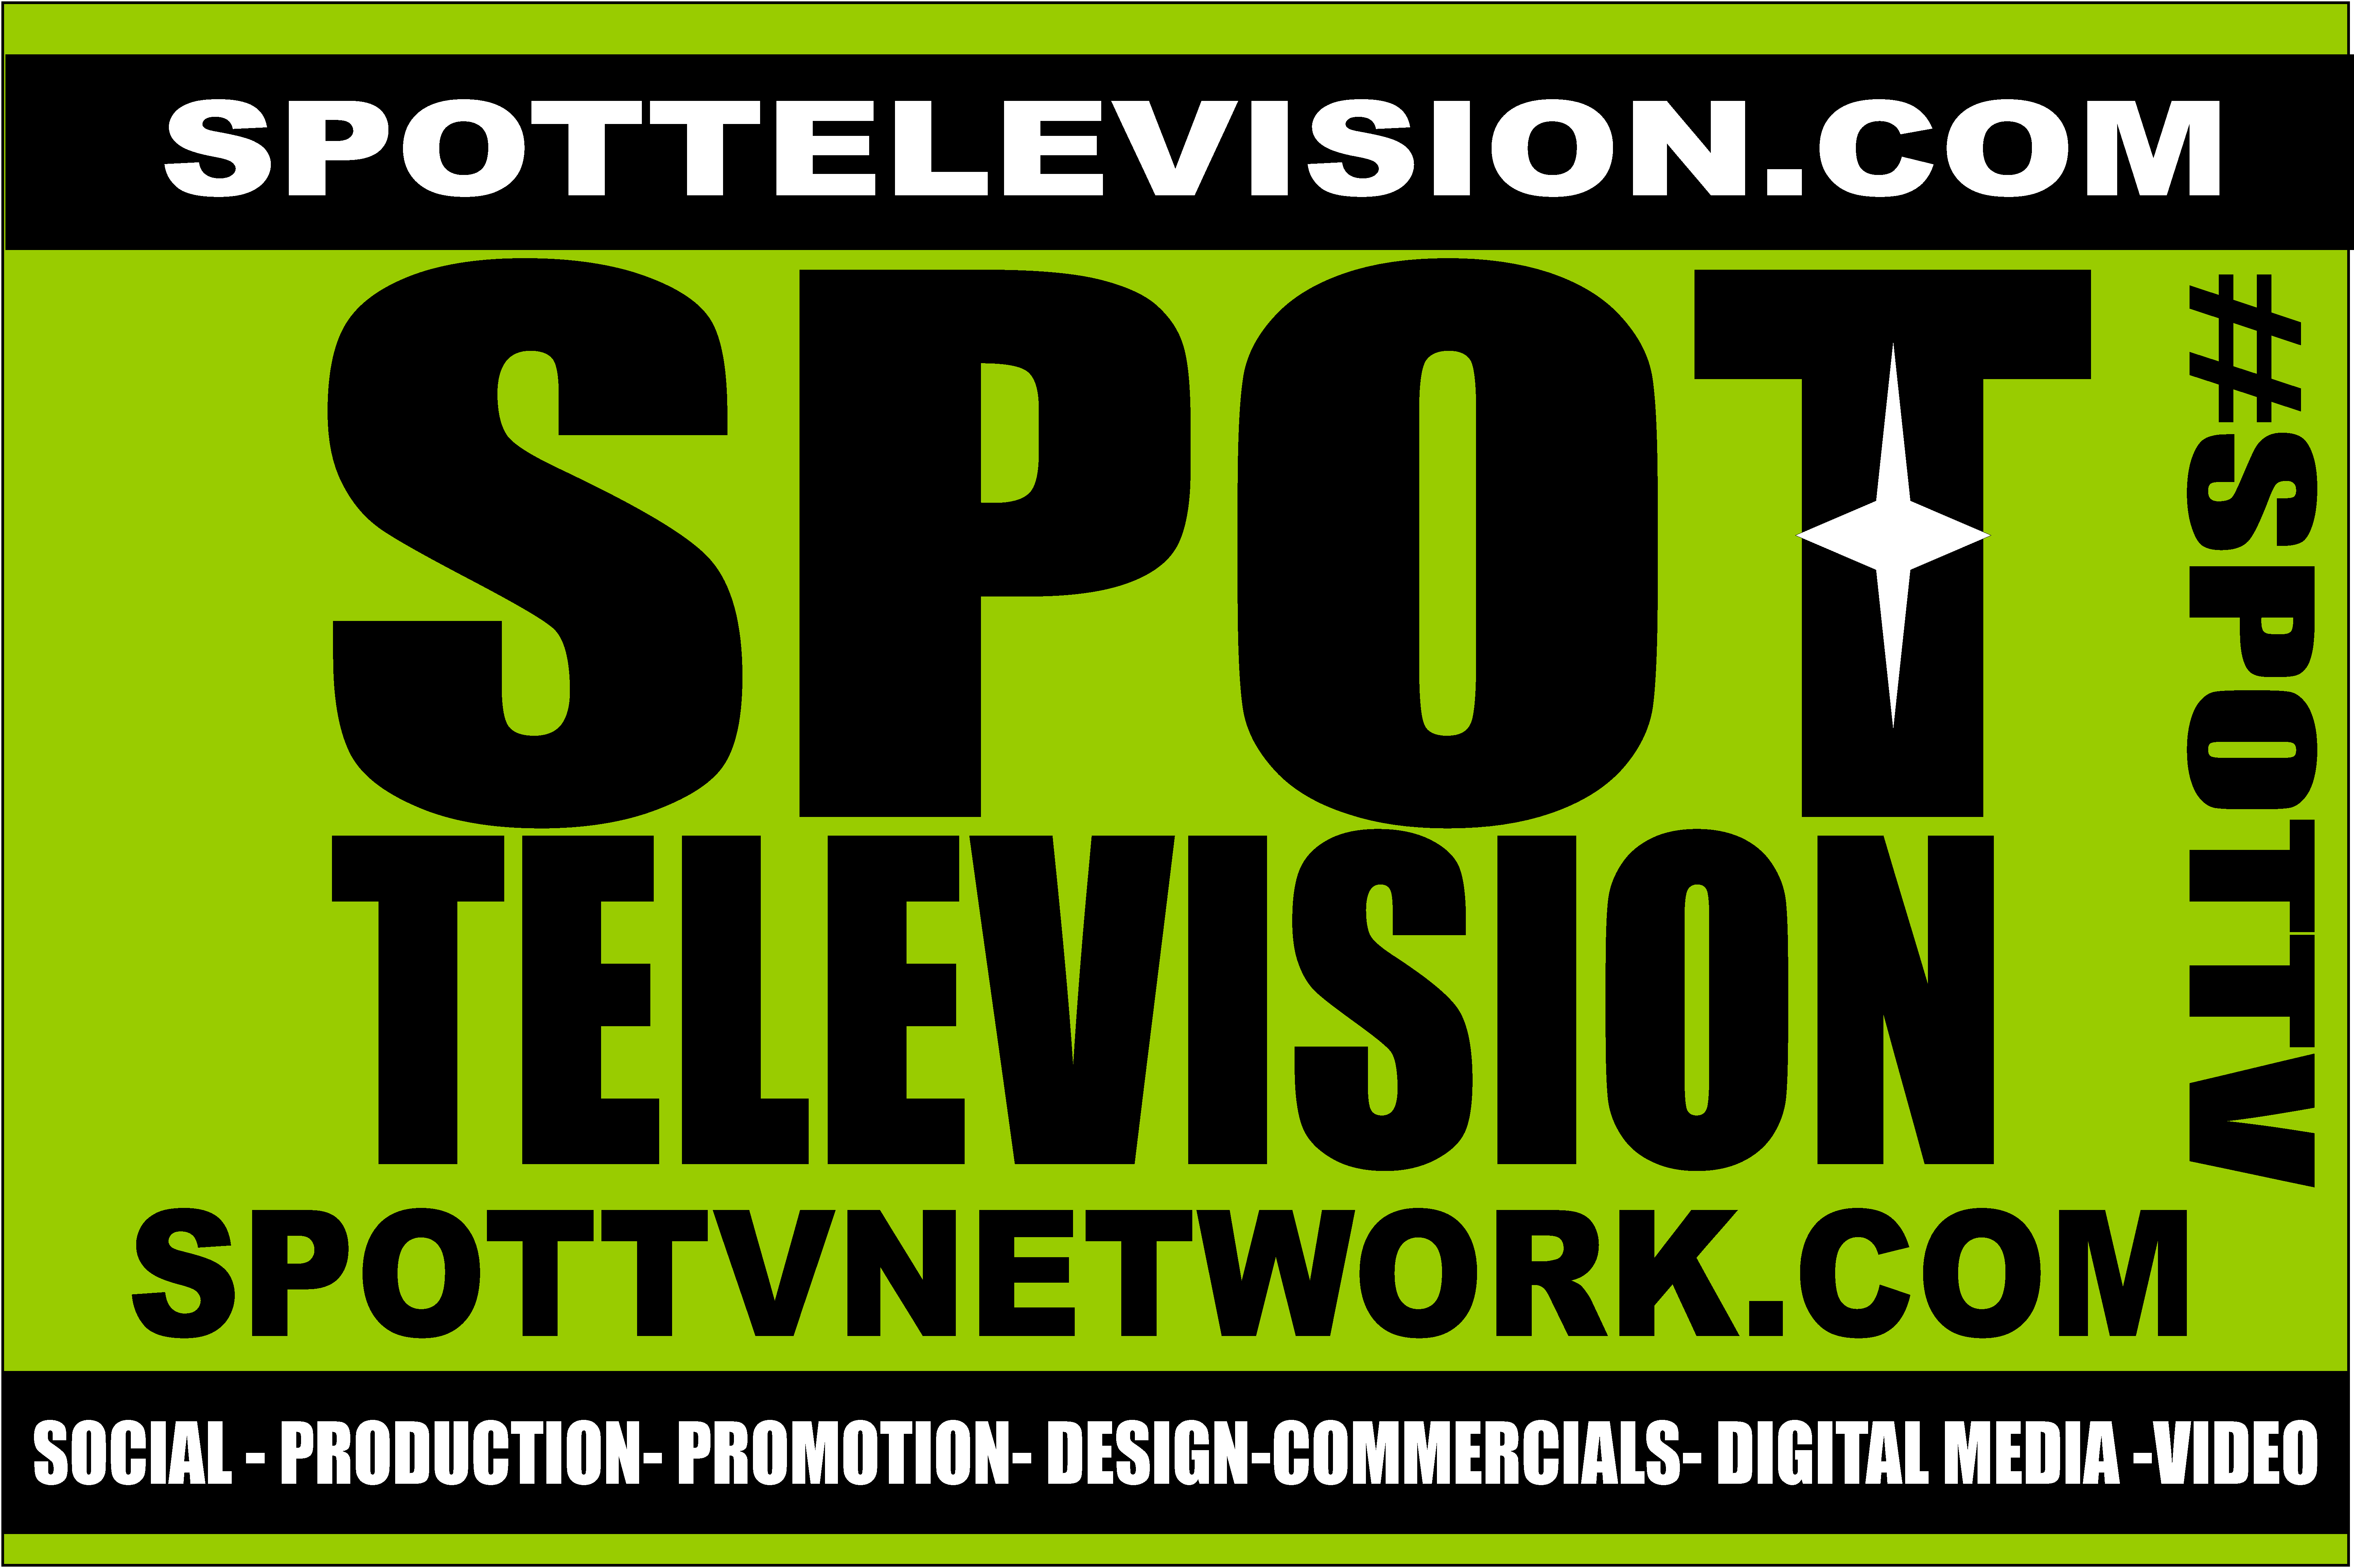 Join The SPOT TV Business Network.